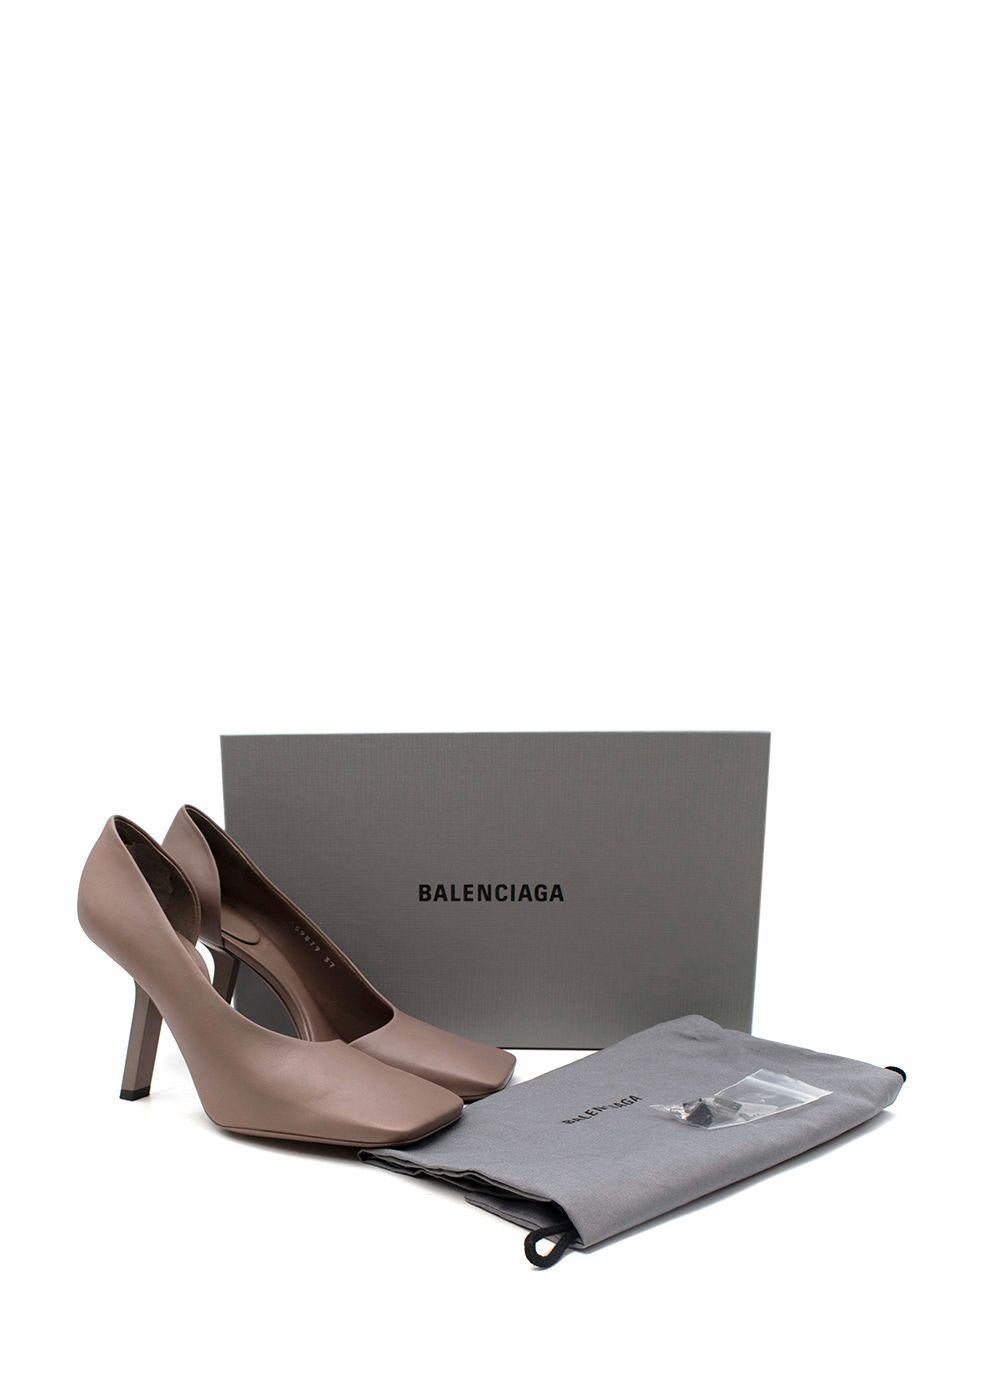 Balenciaga Void Square-toe Leather D'Orsay Nude Pumps

- Smooth neutral leather body 
- Soft leather, very comfortable fit
- Distorted silhouette
- Wide square toe 
- Cushioned insole 
- Slip on 
- Open side 
- Angled square stiletto heel